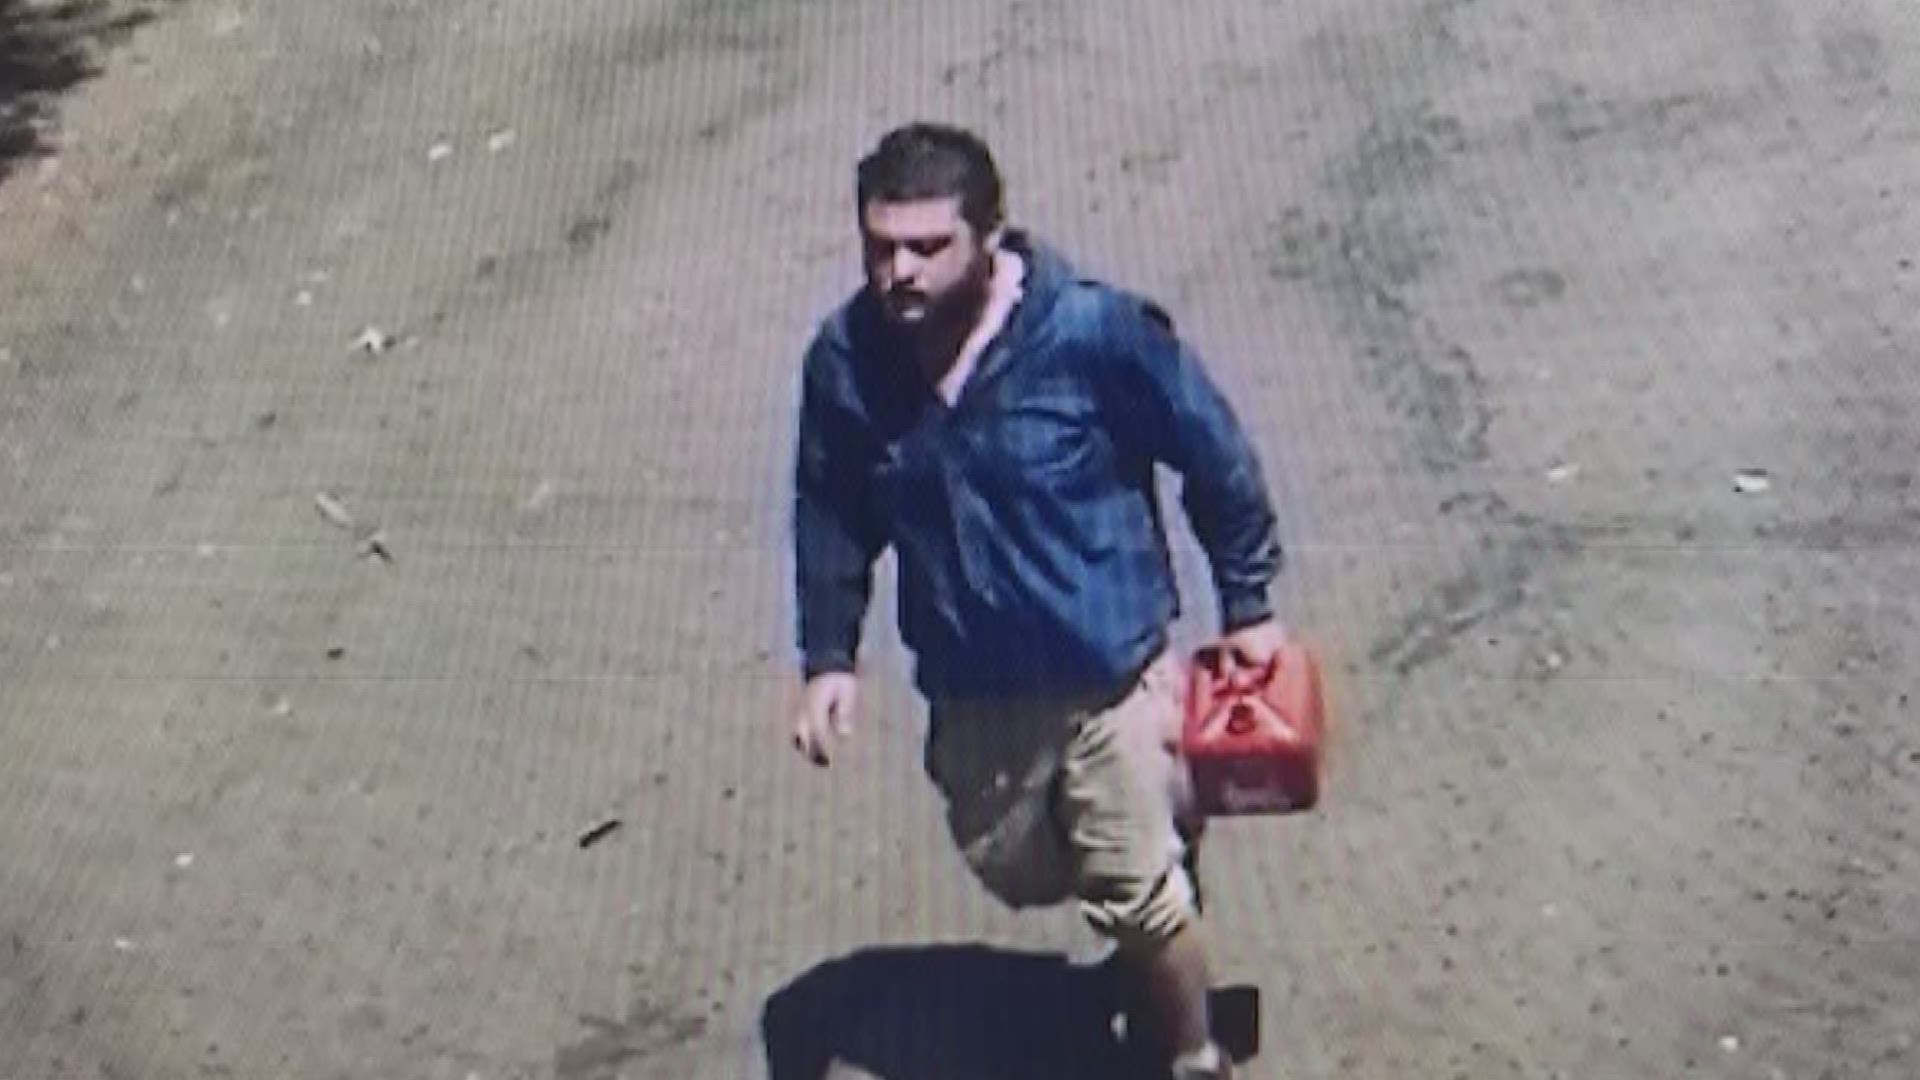 Security video captured suspect Darren William Beach entering One N Ten and allegedly proceeded to set fire to the youth center.